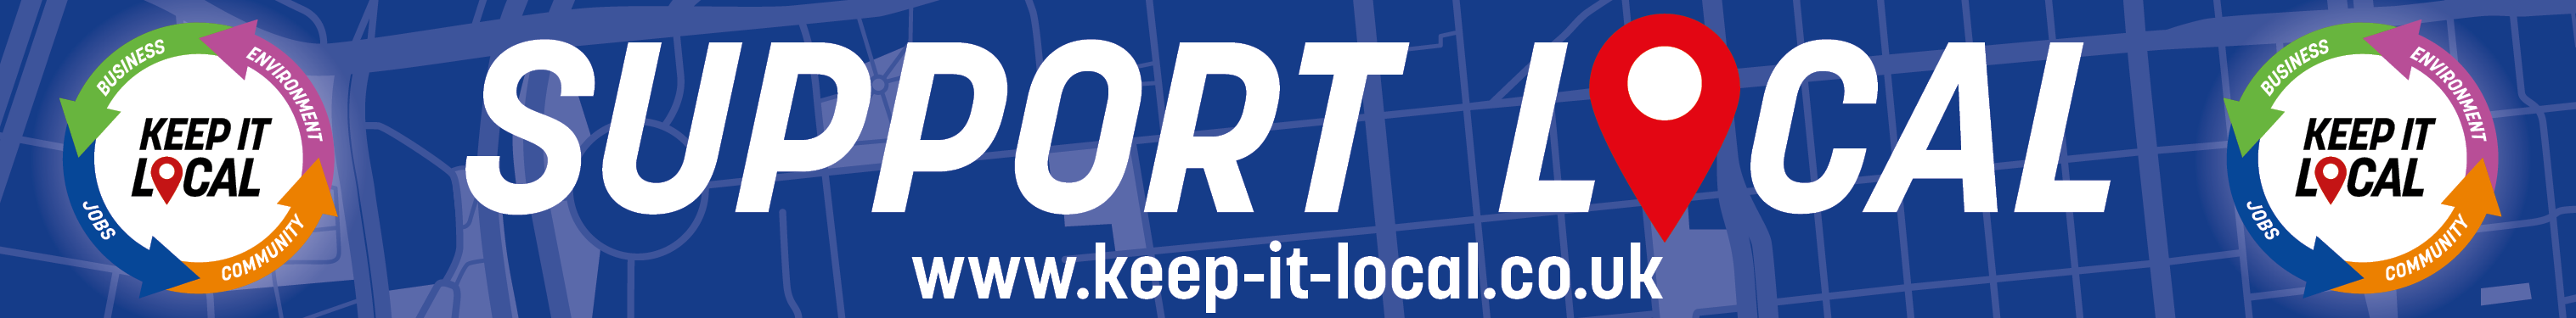 Keep It Local Banner